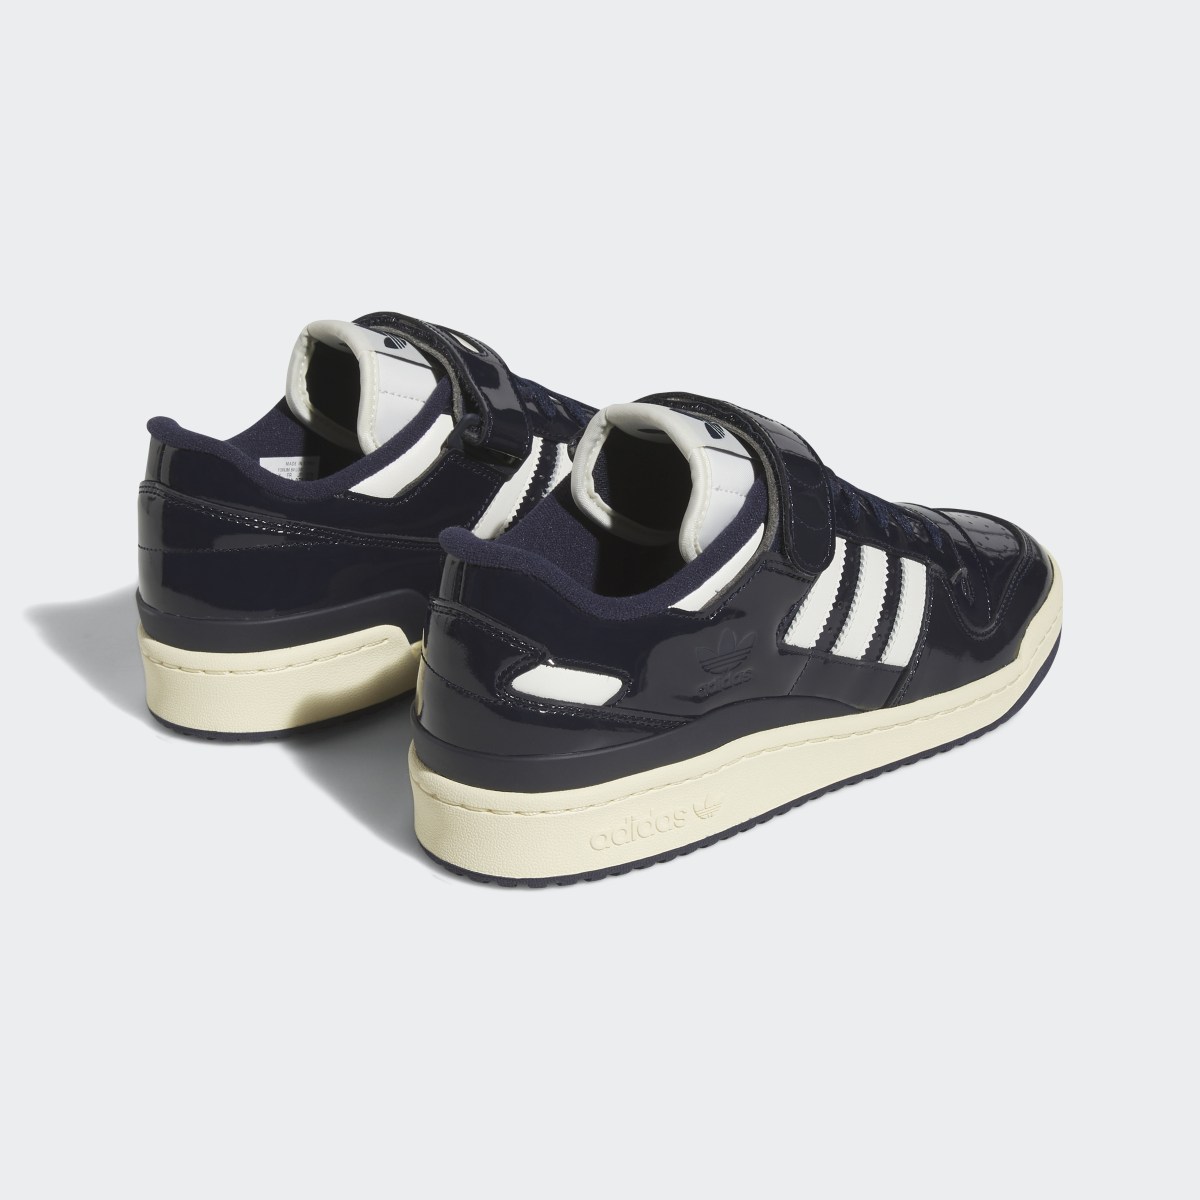 Adidas Forum 84 Low Shoes. 6